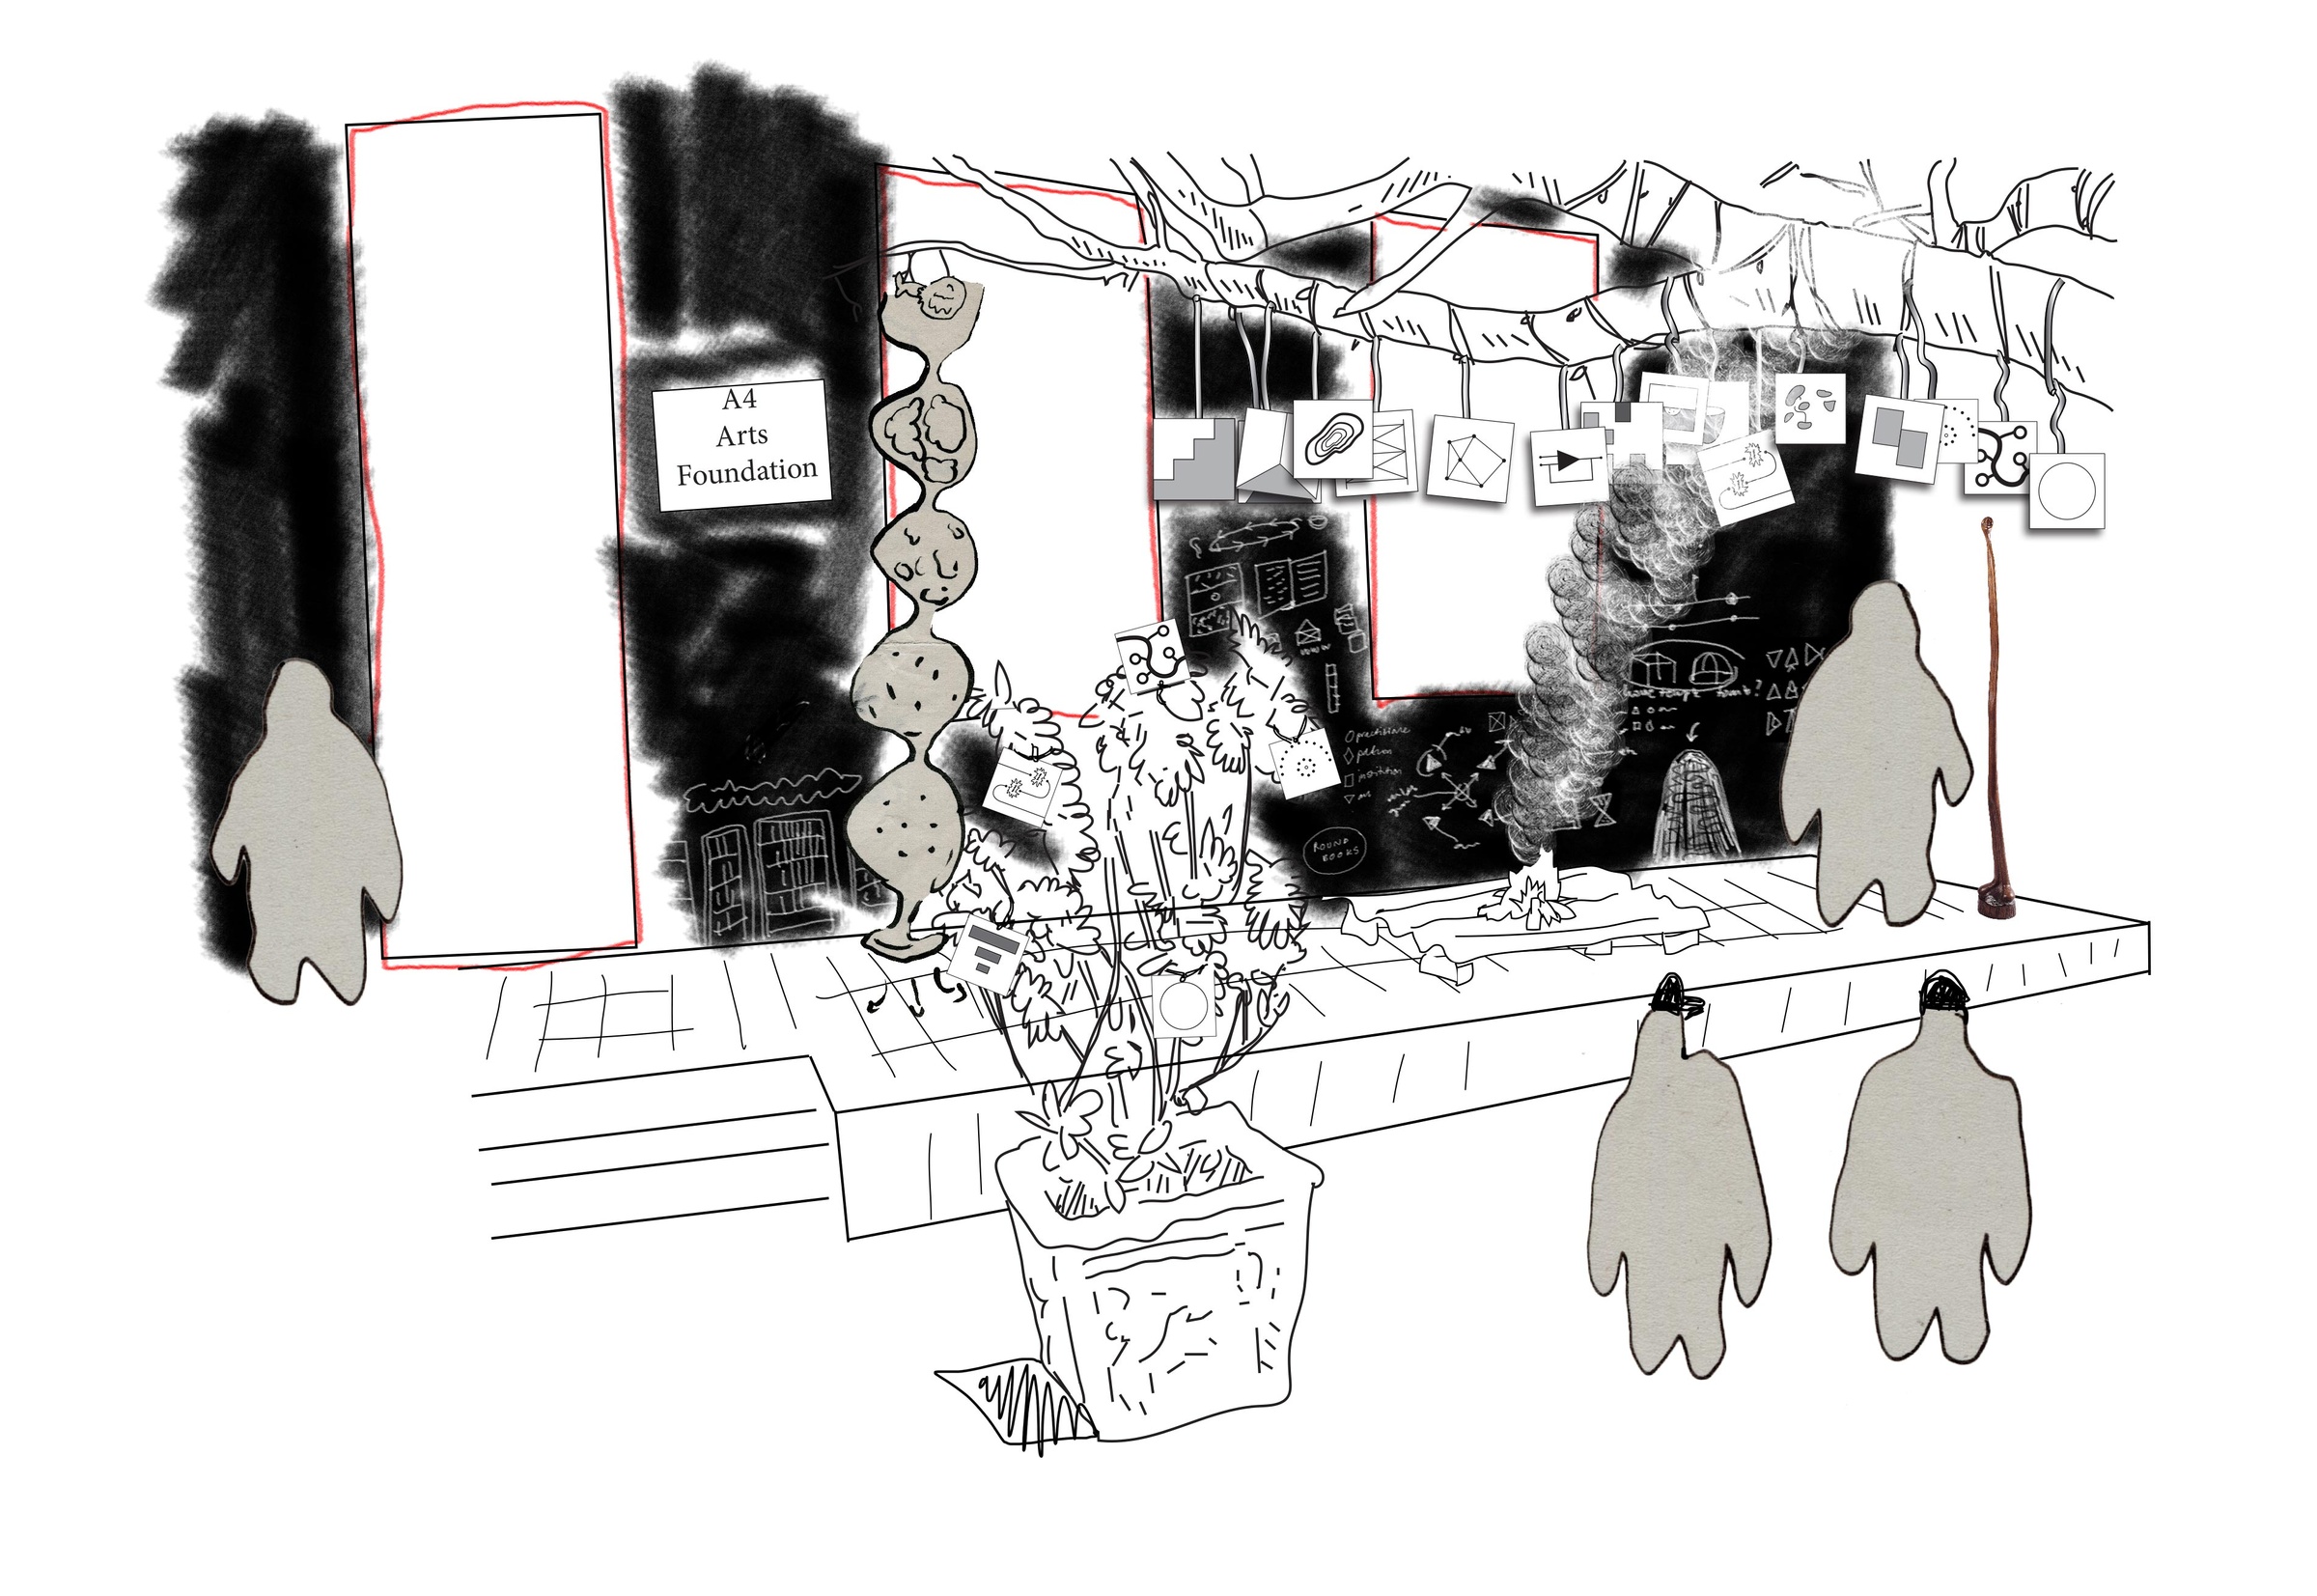 Process image from A4’s ‘Stoep Residency’ at the Association of Visual Arts (AVA) in Cape Town. A digital collage of hand drawn drawings and digital painting shows the AVA patio with a sign that reads ‘A4 Arts Foundation’ next to the AVA’s entrance, with artworks suspended from a tree branch along the length of the patio and a makeshift platform with a wood fire going on top of it.
